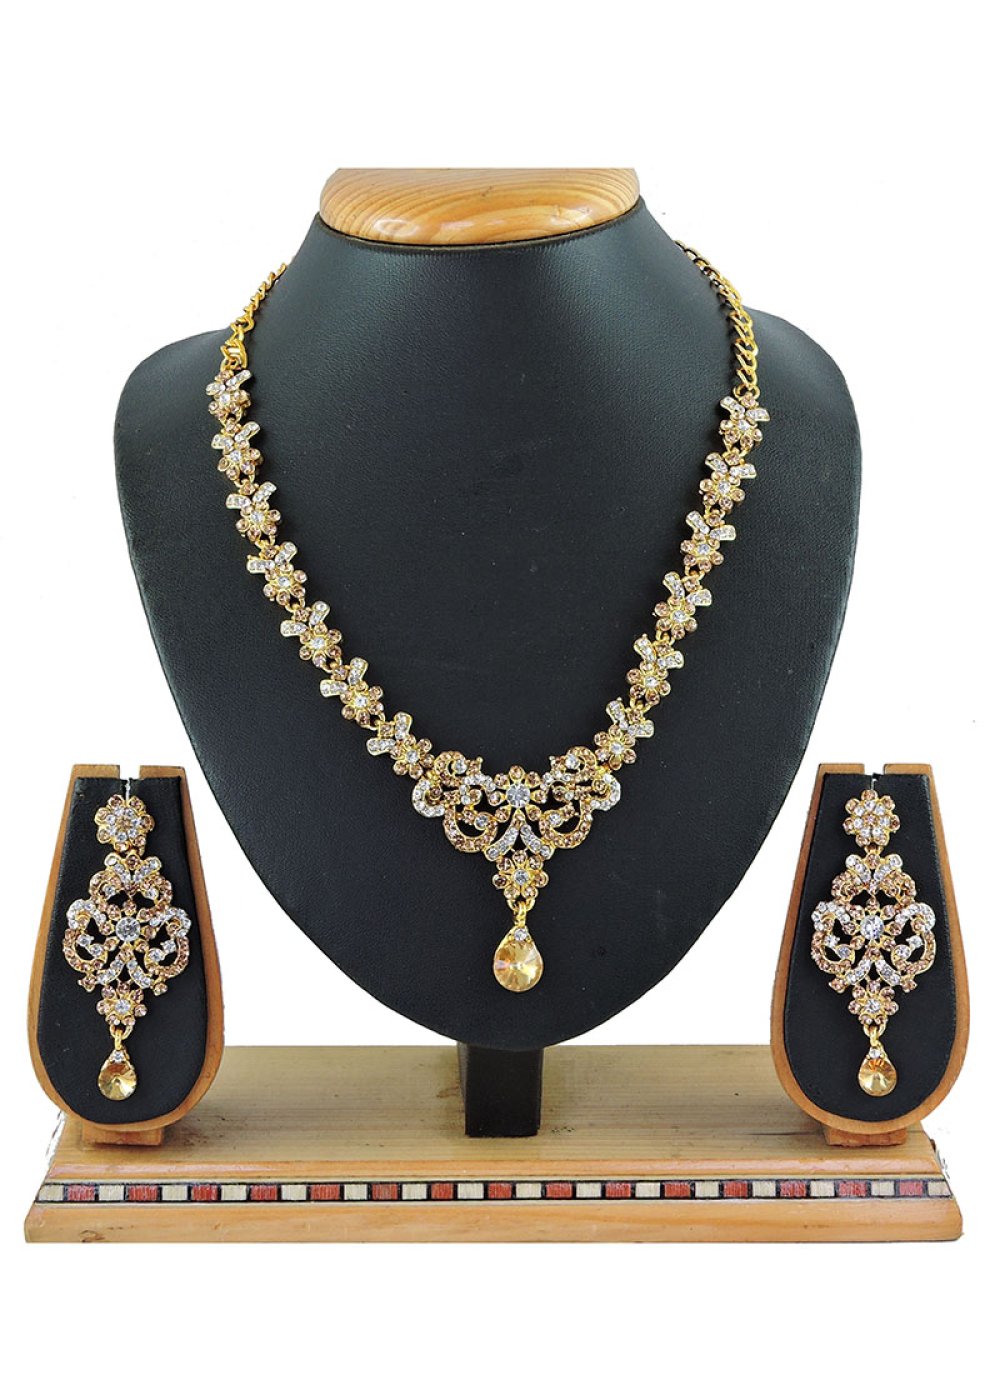 Stone Work Necklace Set in Gold and White